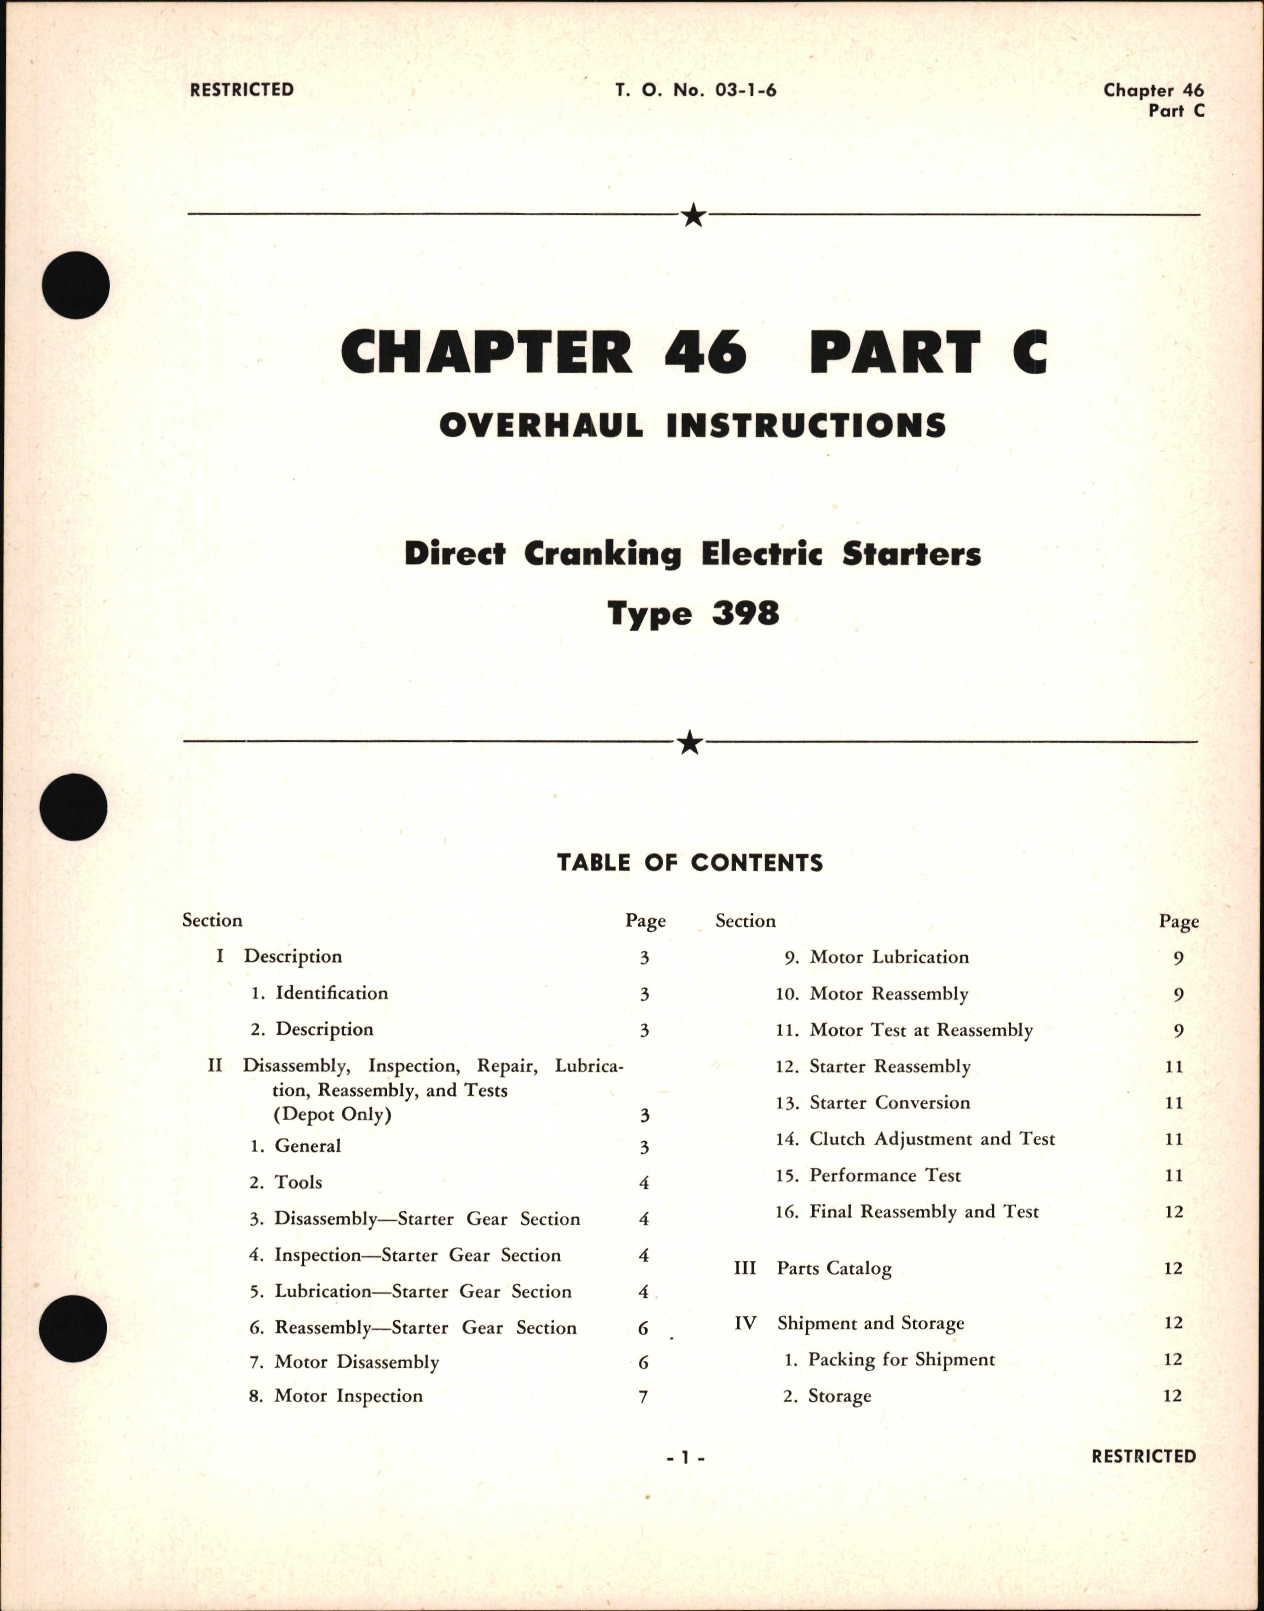 Sample page 1 from AirCorps Library document: Overhaul Instructions for Direct Cranking Electric Starters, Chapter 46 Part C